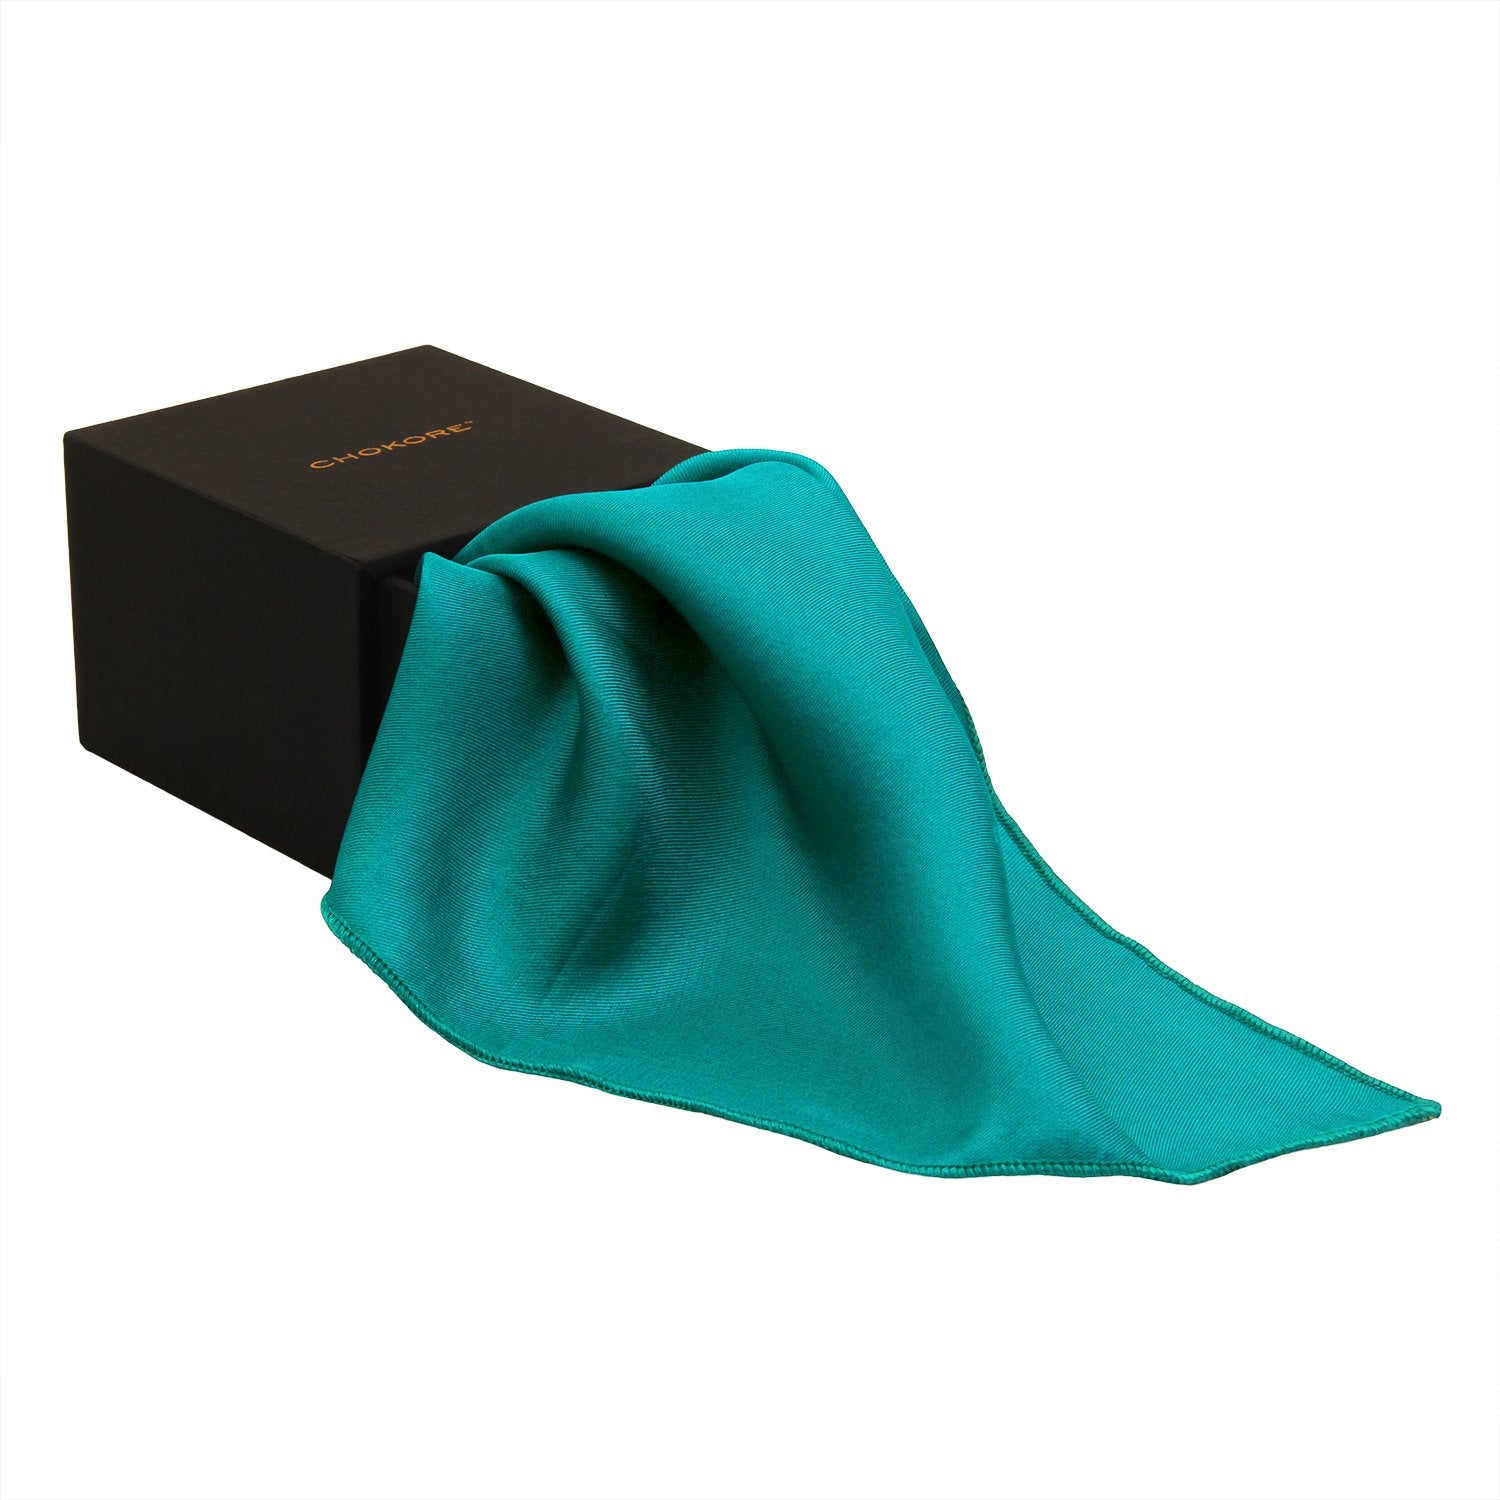 Chokore Enamel Blue Pure Silk Pocket Square, from the Solids Line